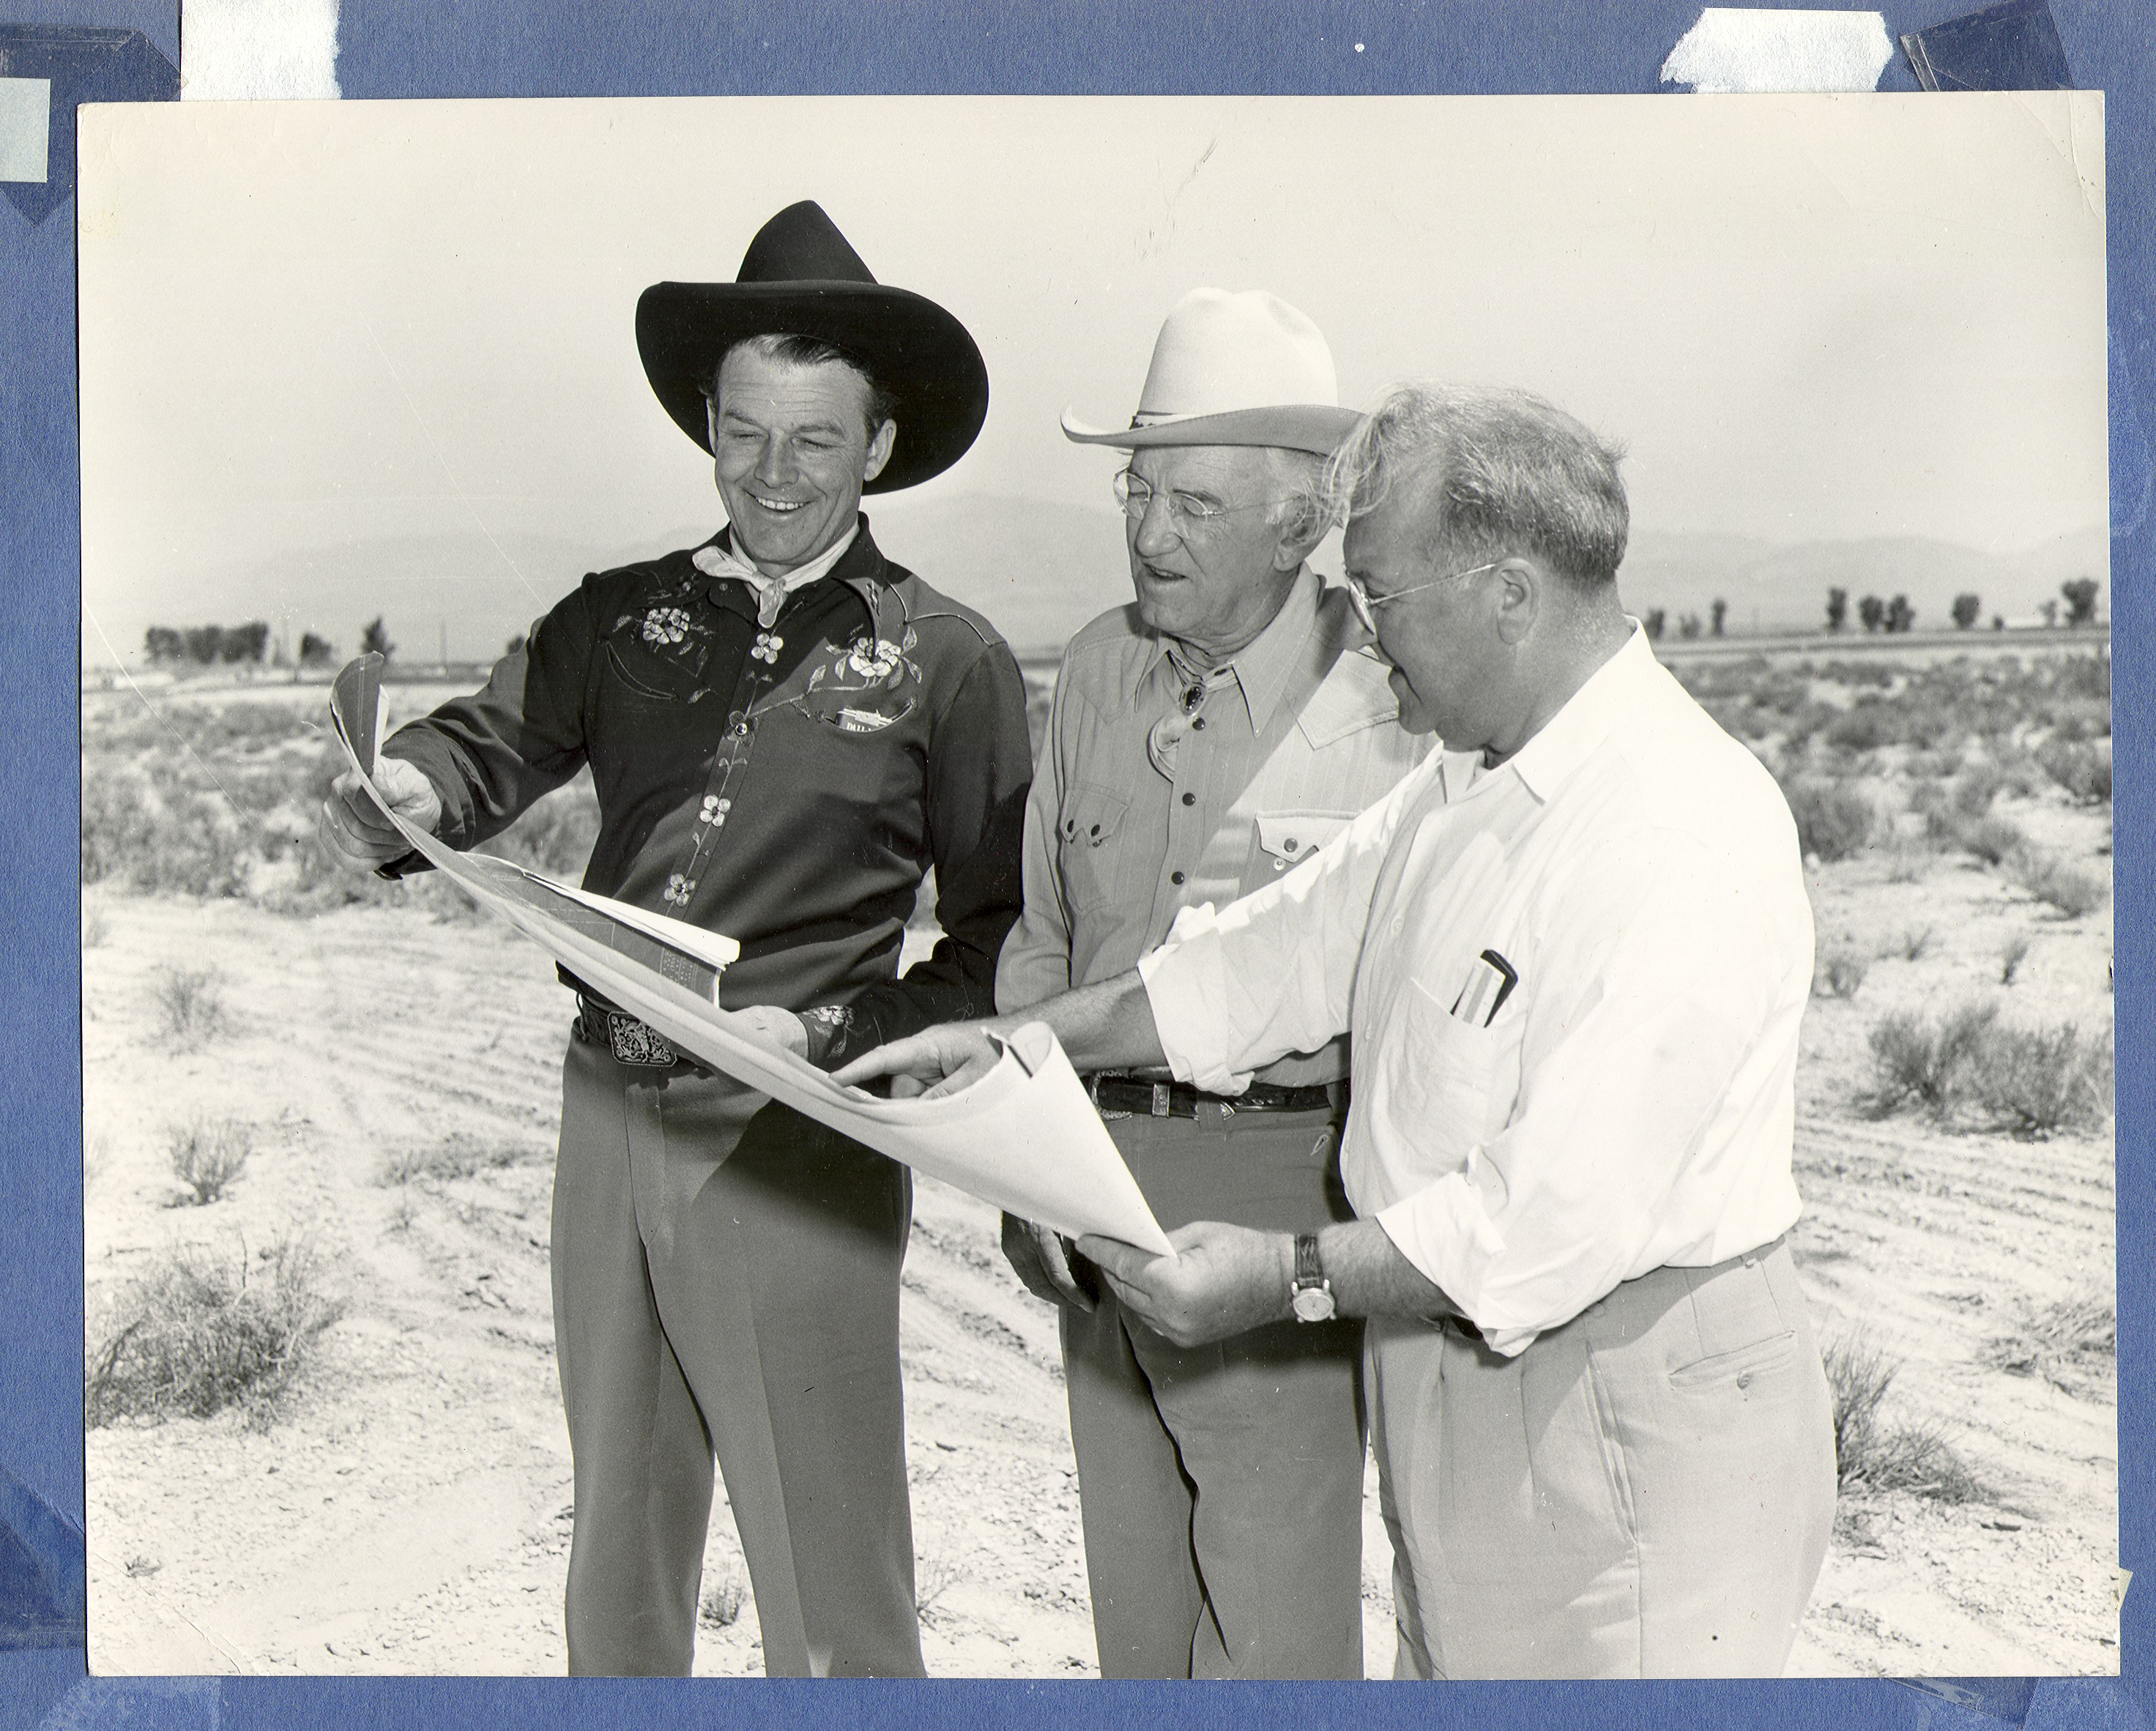 Rex Bell (left) with Mr. Wells looking at blueprints or plans of some sort: photographic print